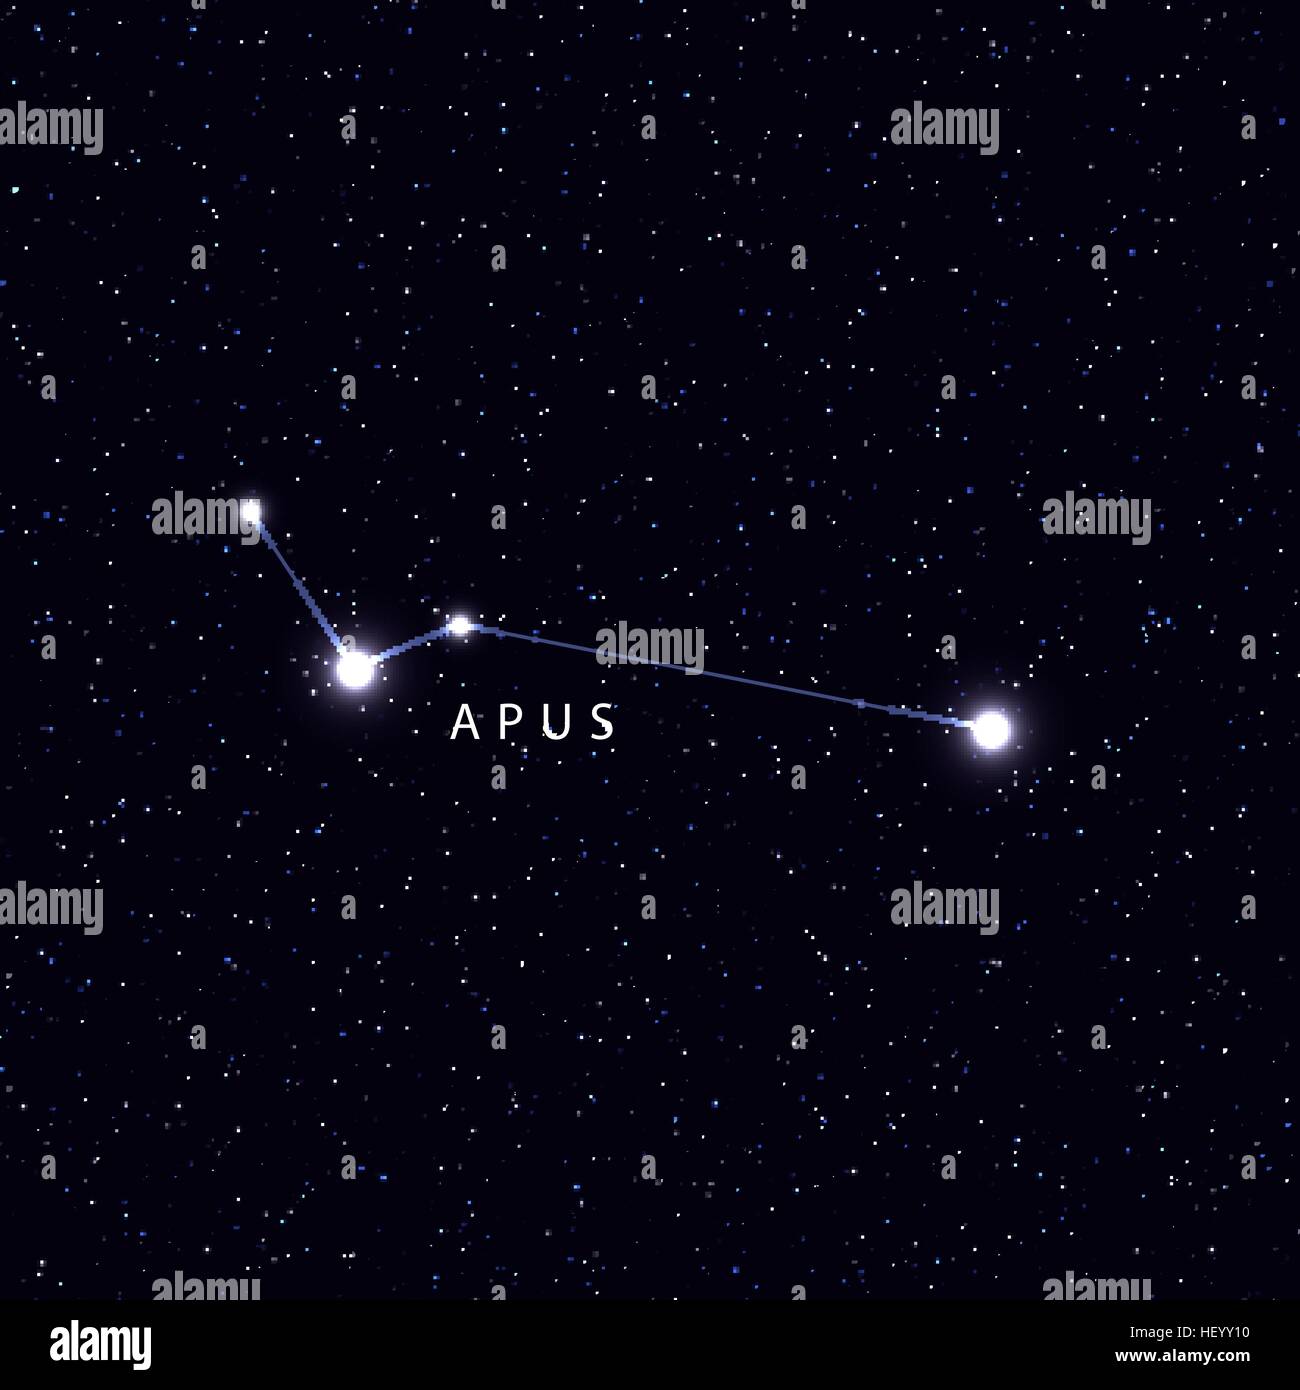 Sky Map with the name of the stars and constellations. Astronomical symbol constellation Apus Stock Vector